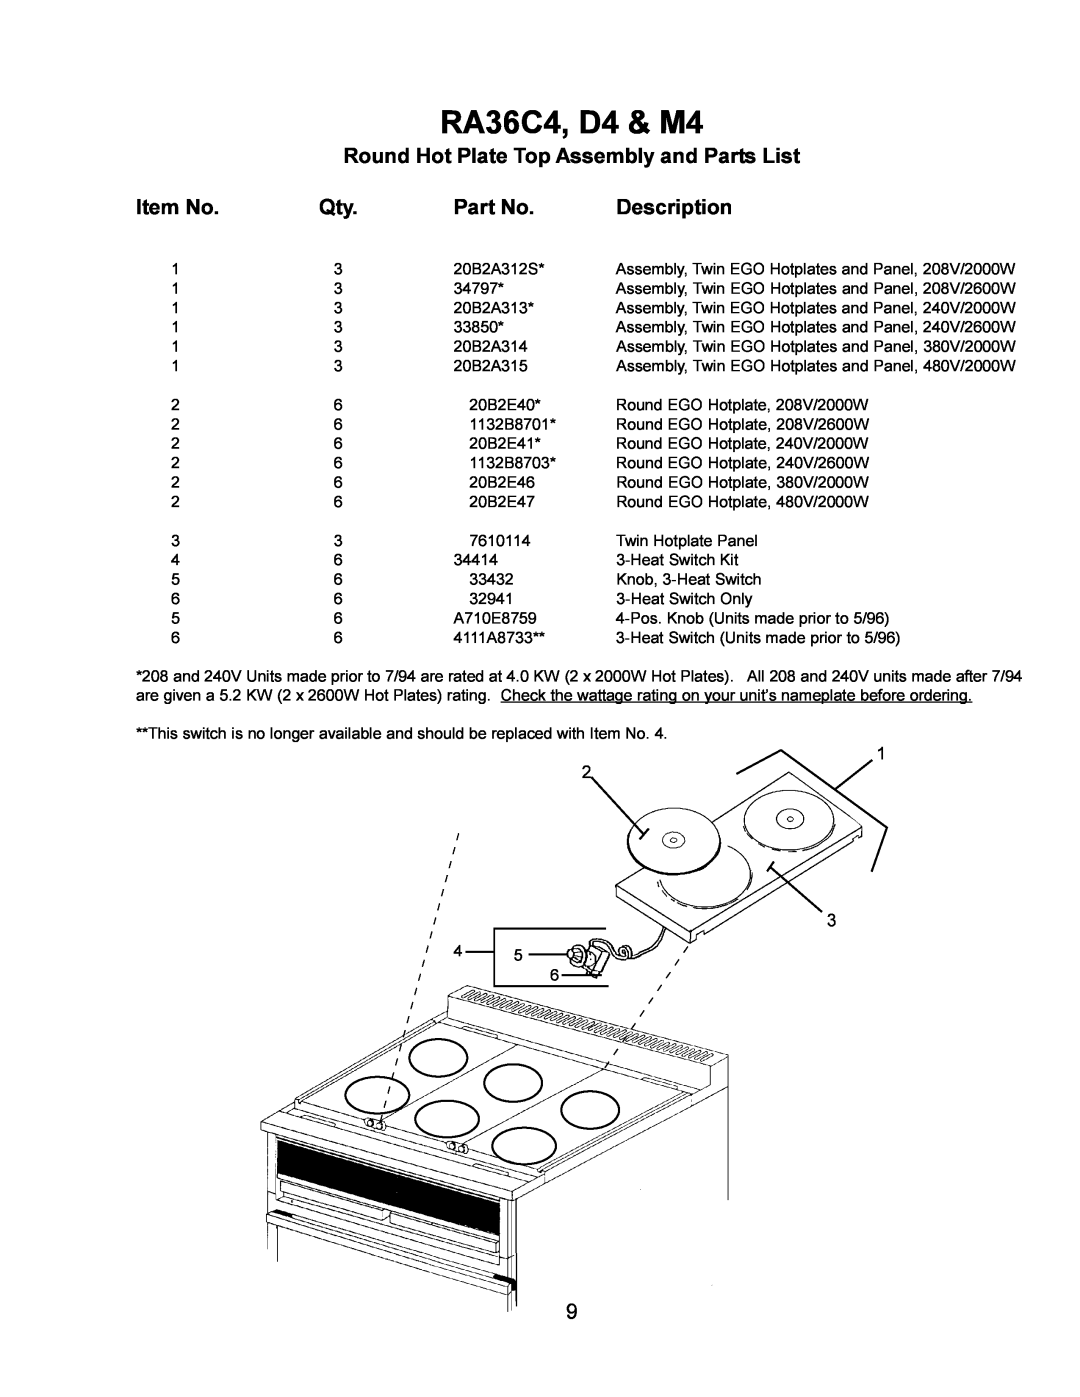 Toastmaster RA36M, RA36D manual RA36C4, D4 & M4, Round Hot Plate Top Assembly and Parts List, Item No, Description 